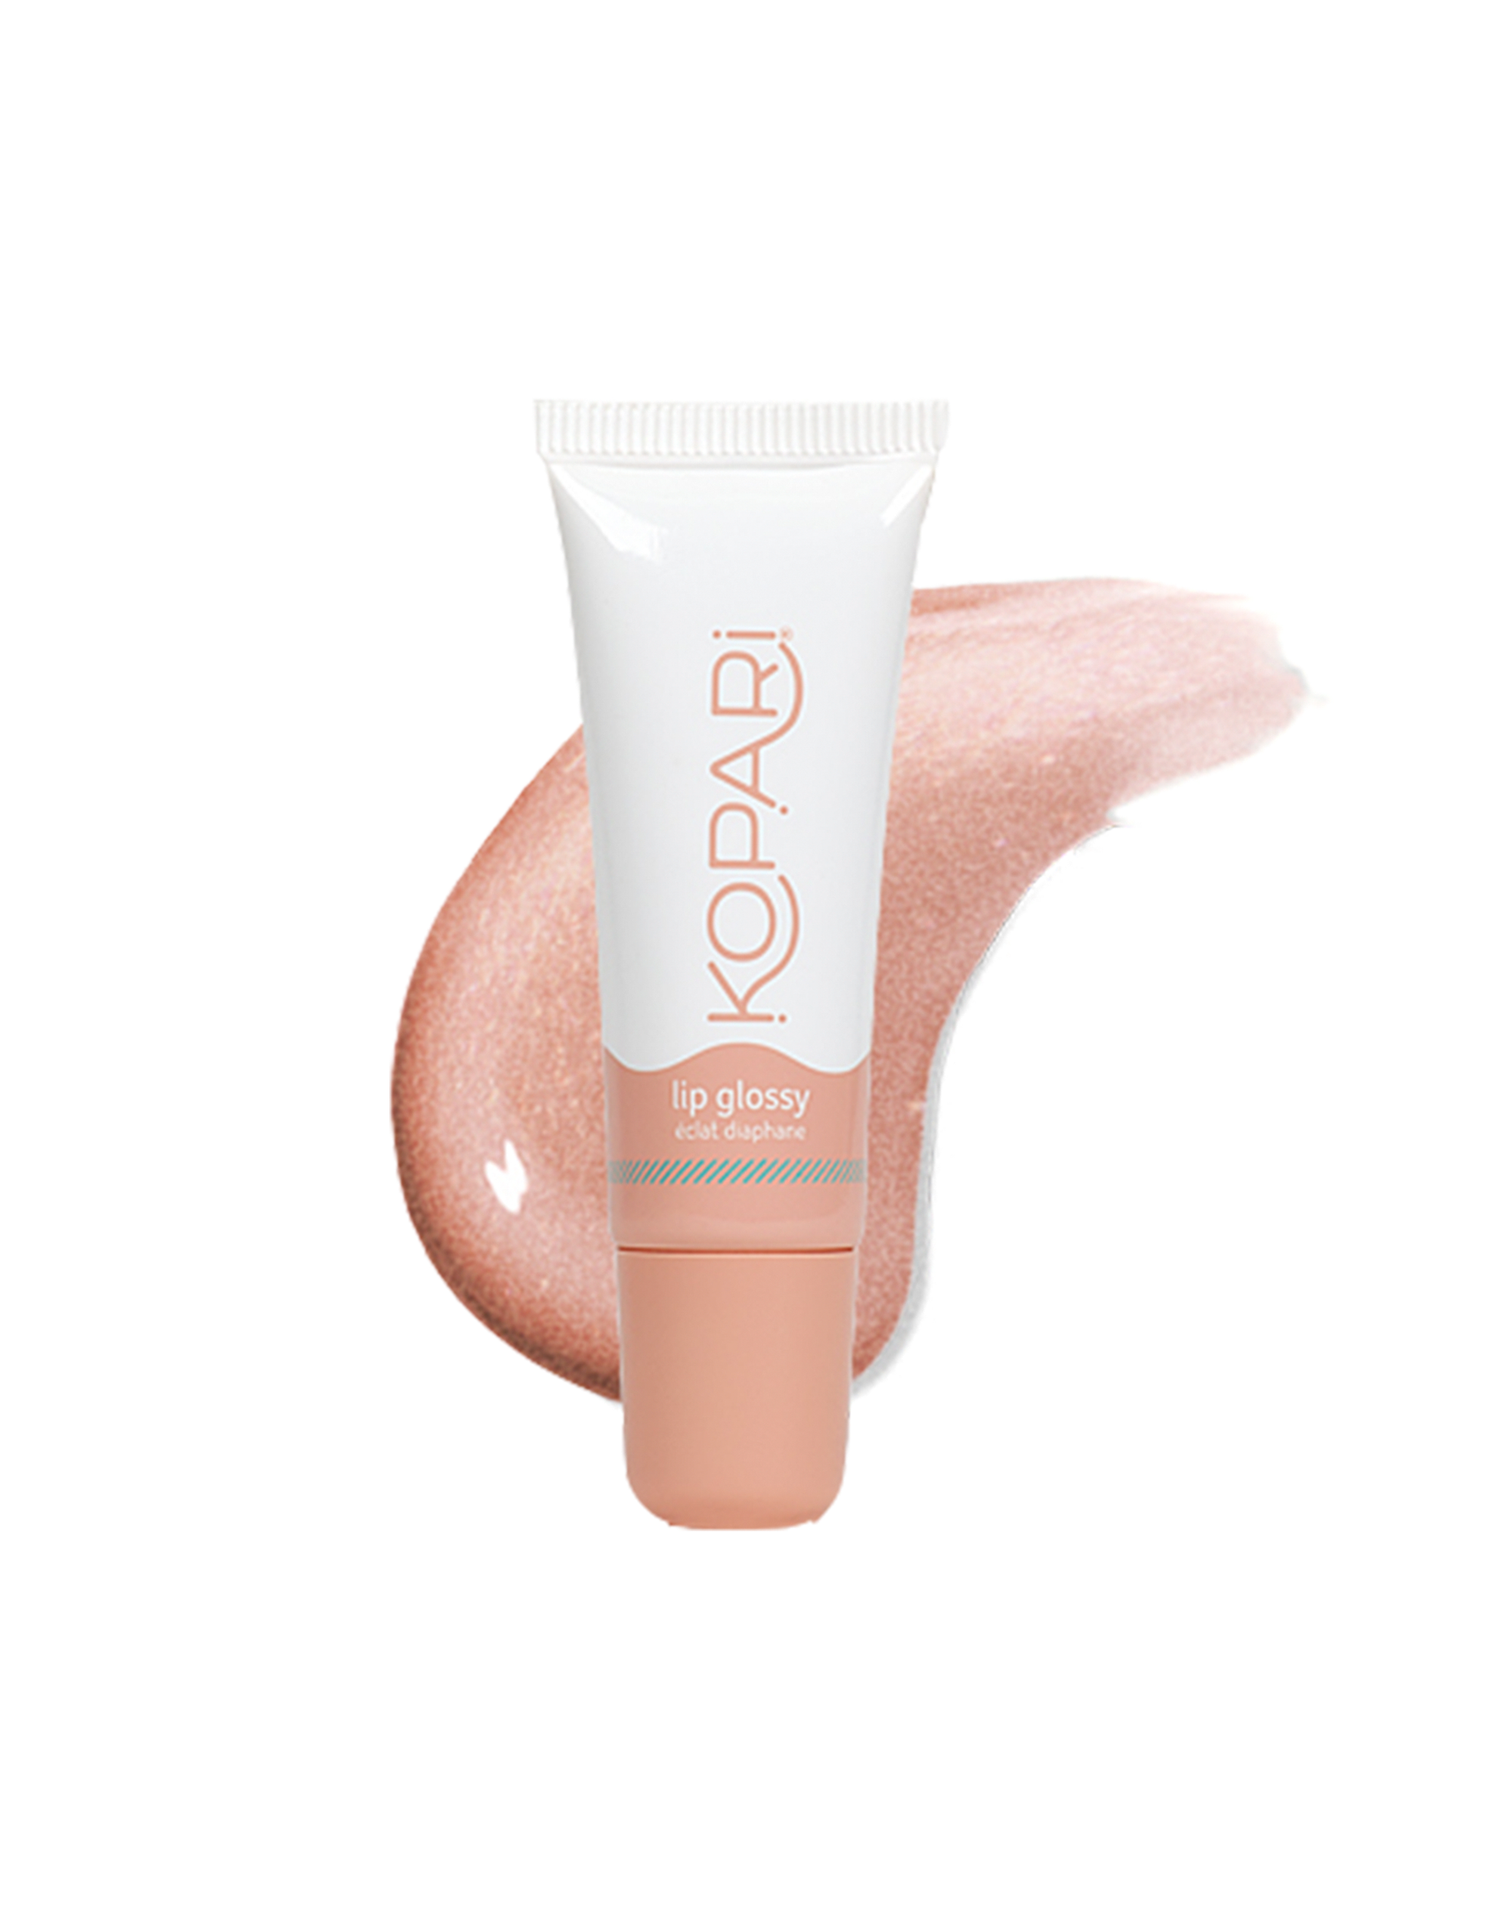 Lip Glossy by Kopari in Birthday Suit - Product View